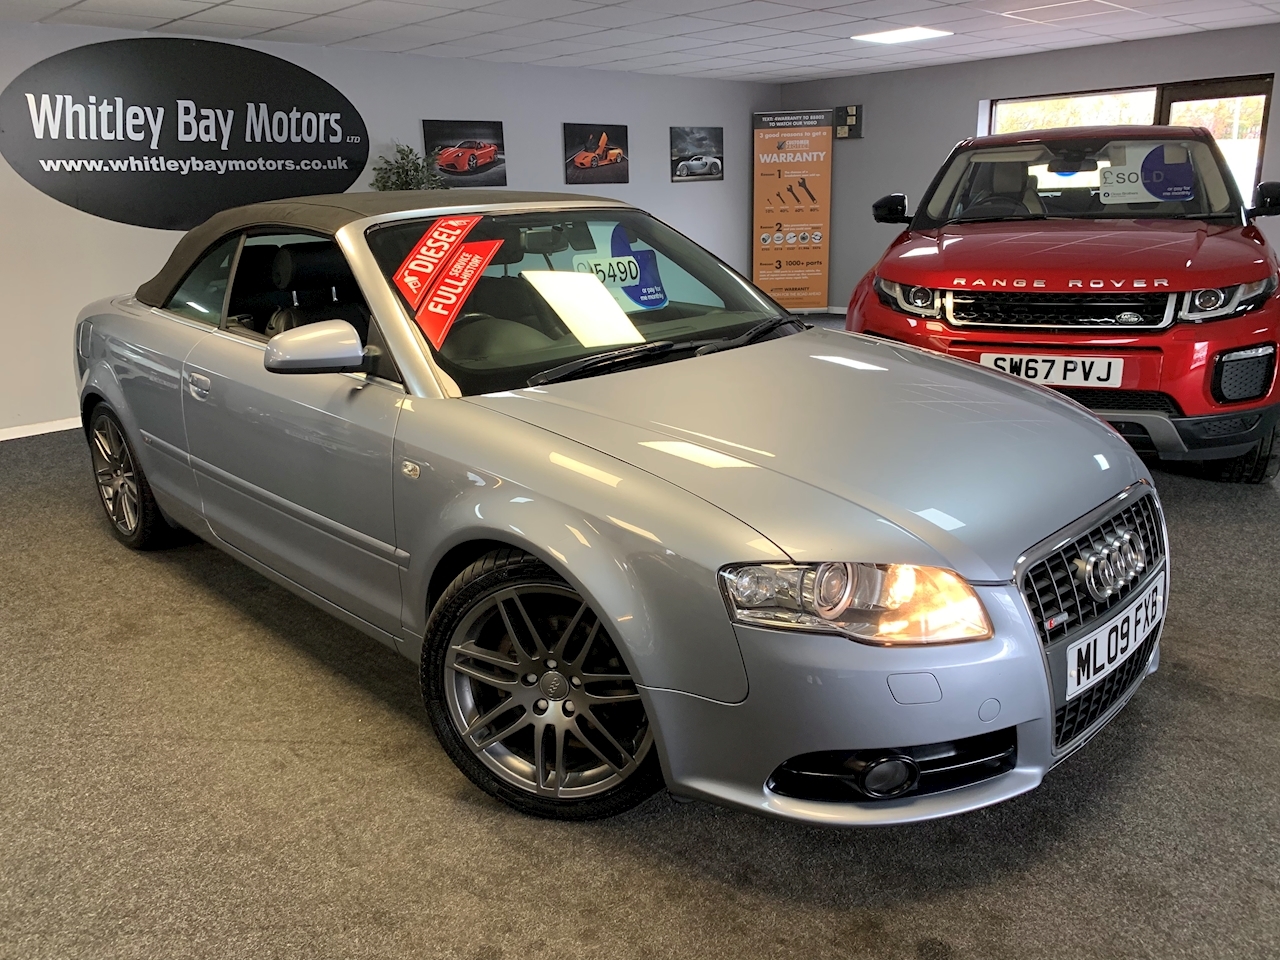 A4 Tdi S Line Special Edition Convertible 2.0 Manual Diesel